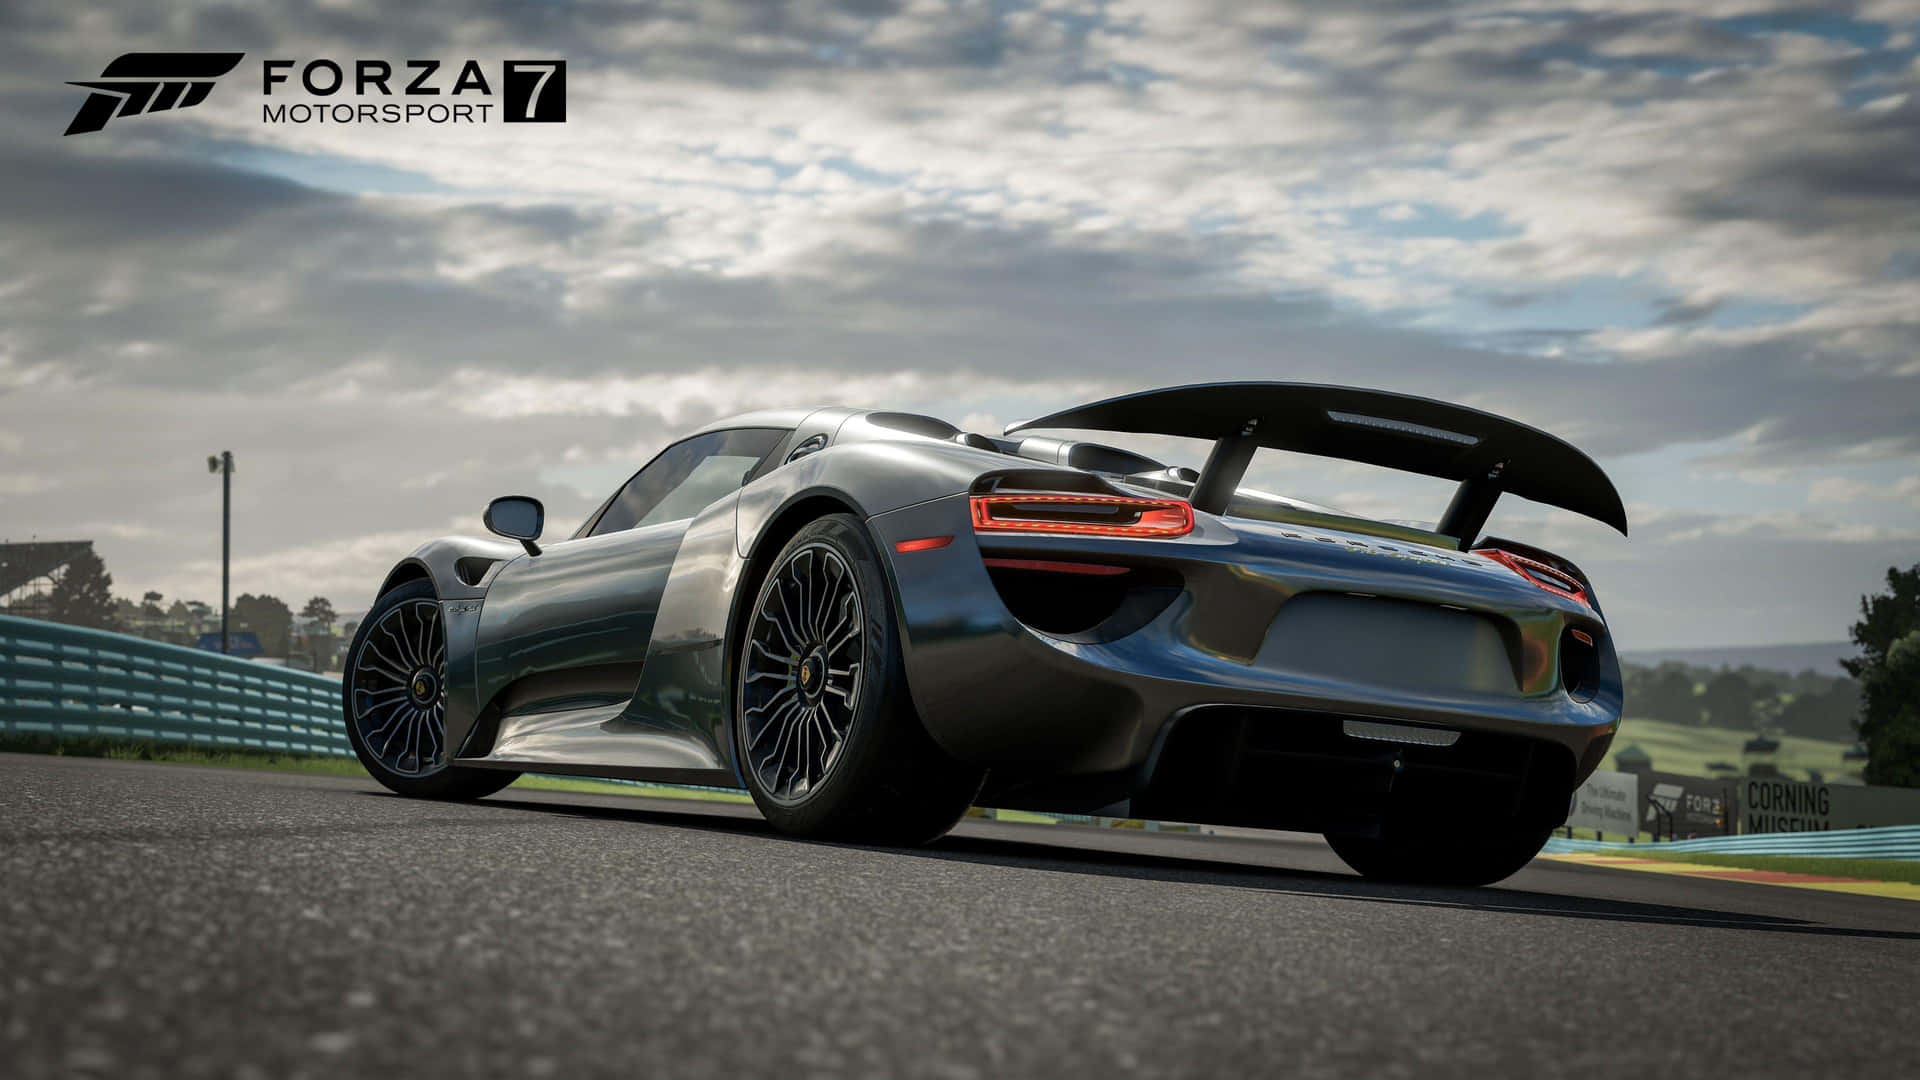 Take the wheel and drive to victory in Forza Motorsport 7! Wallpaper